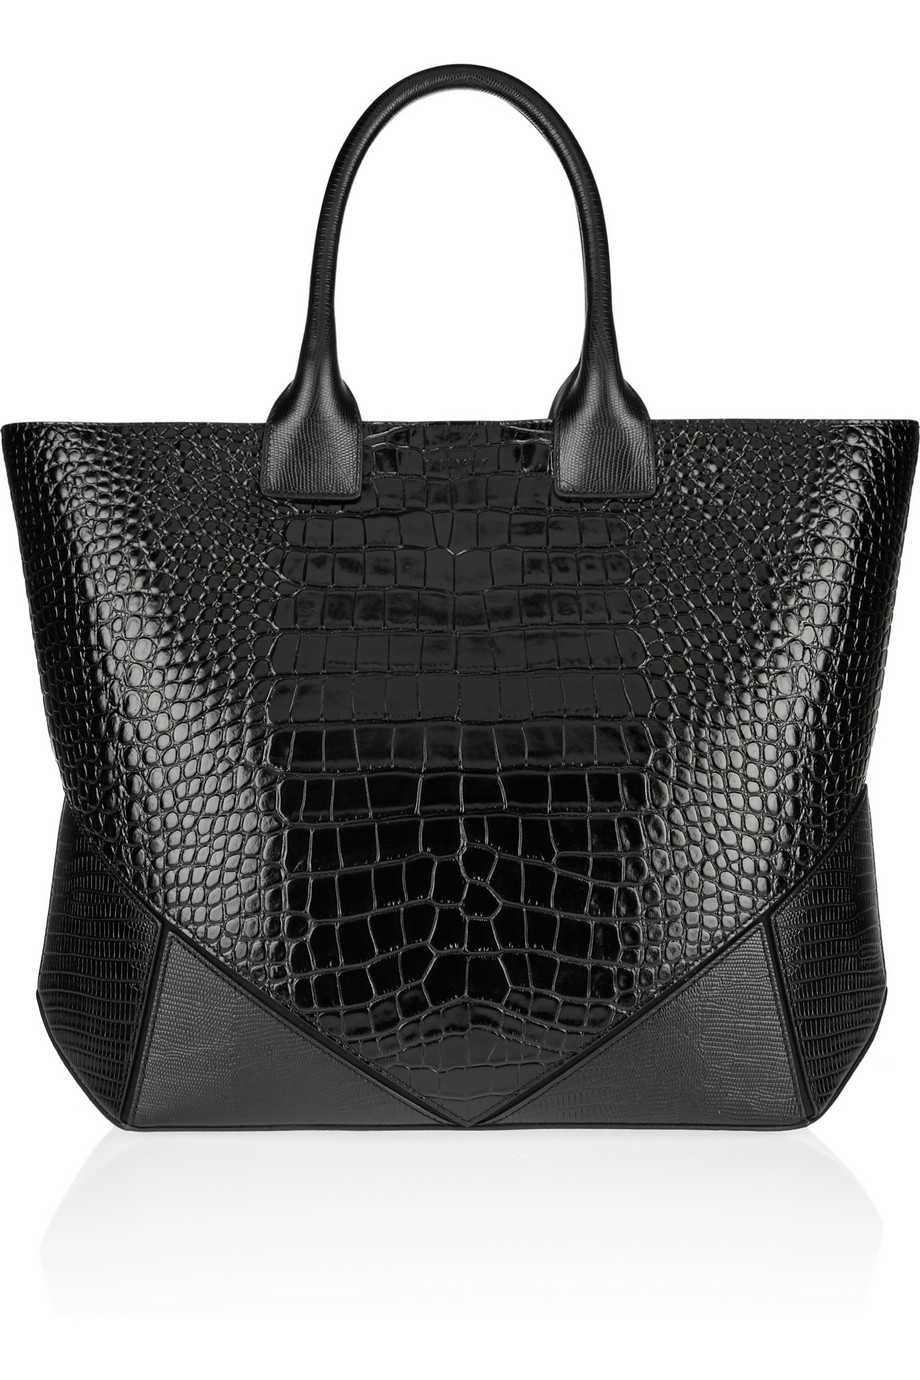 Givenchy Easy Bag in Black Croc Embossed Leather in Black | Lyst